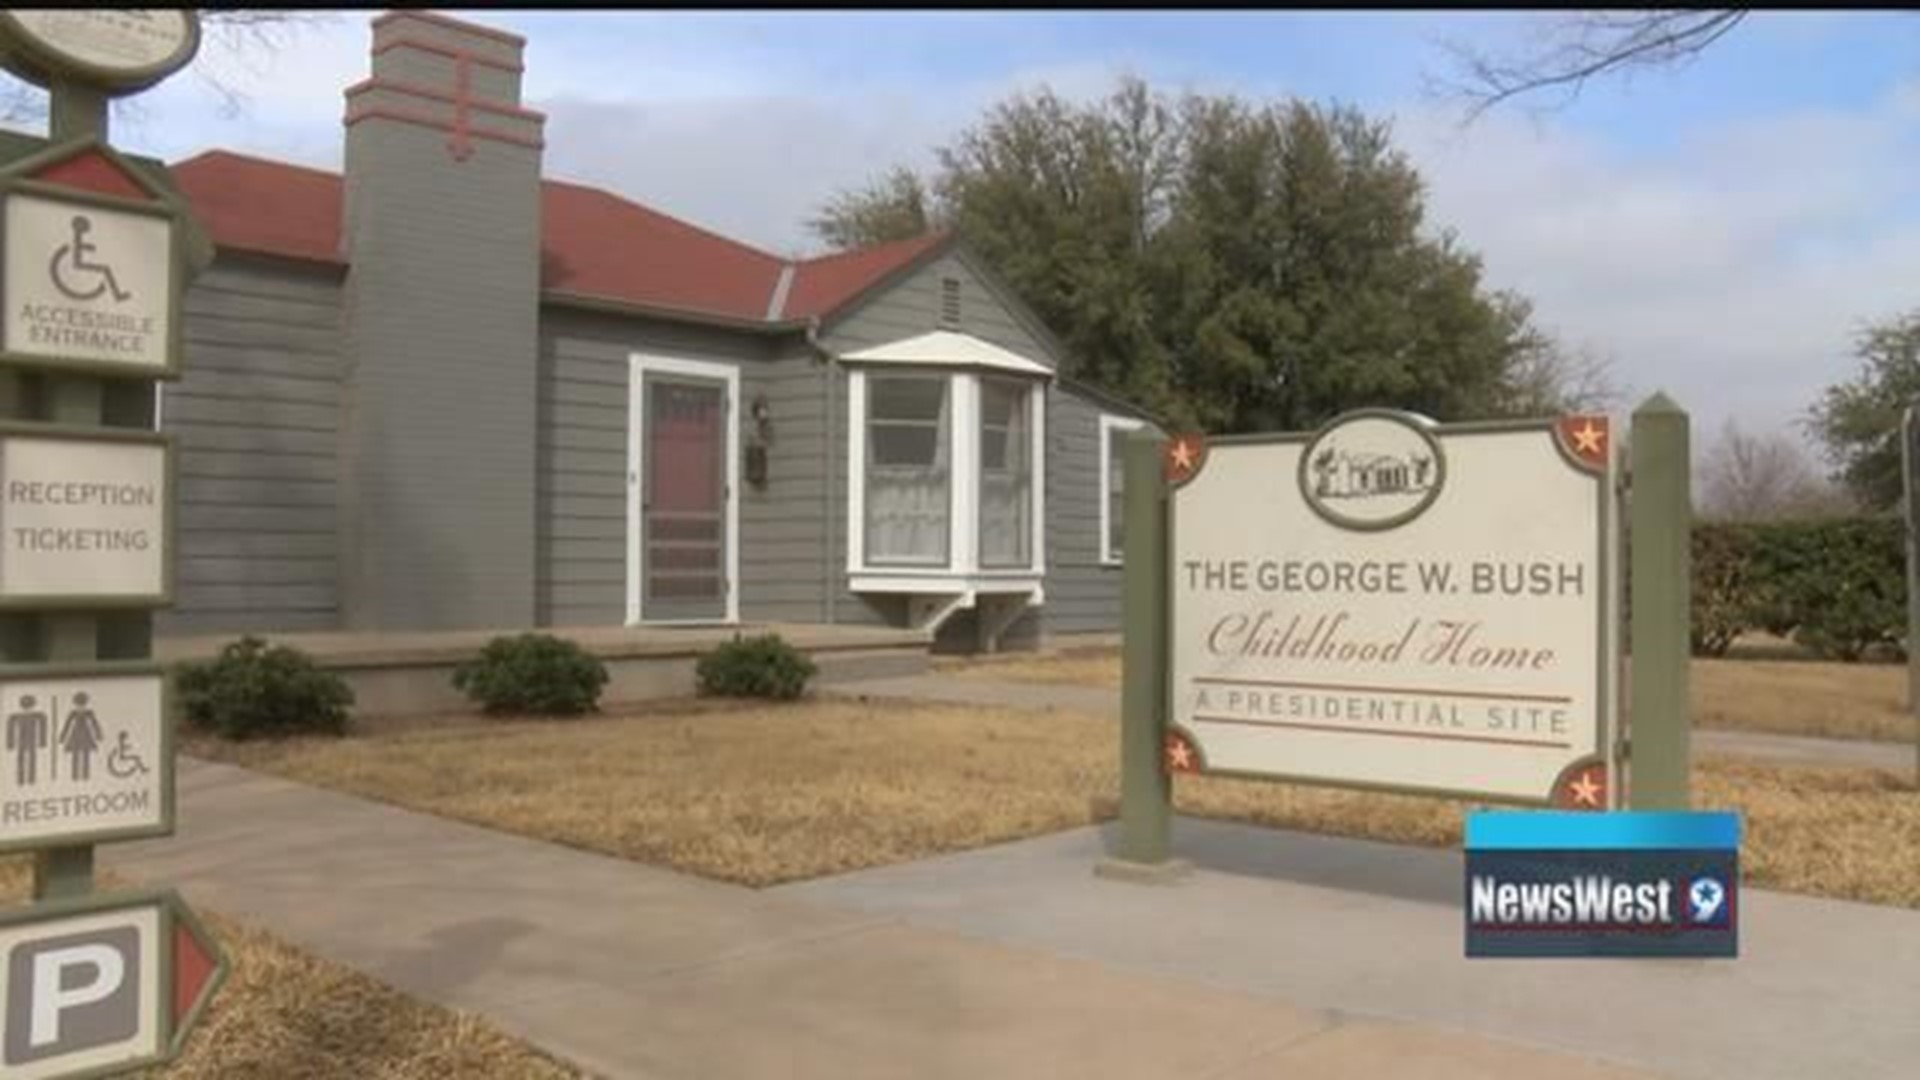 George W. Bush Childhood Home could become historic site